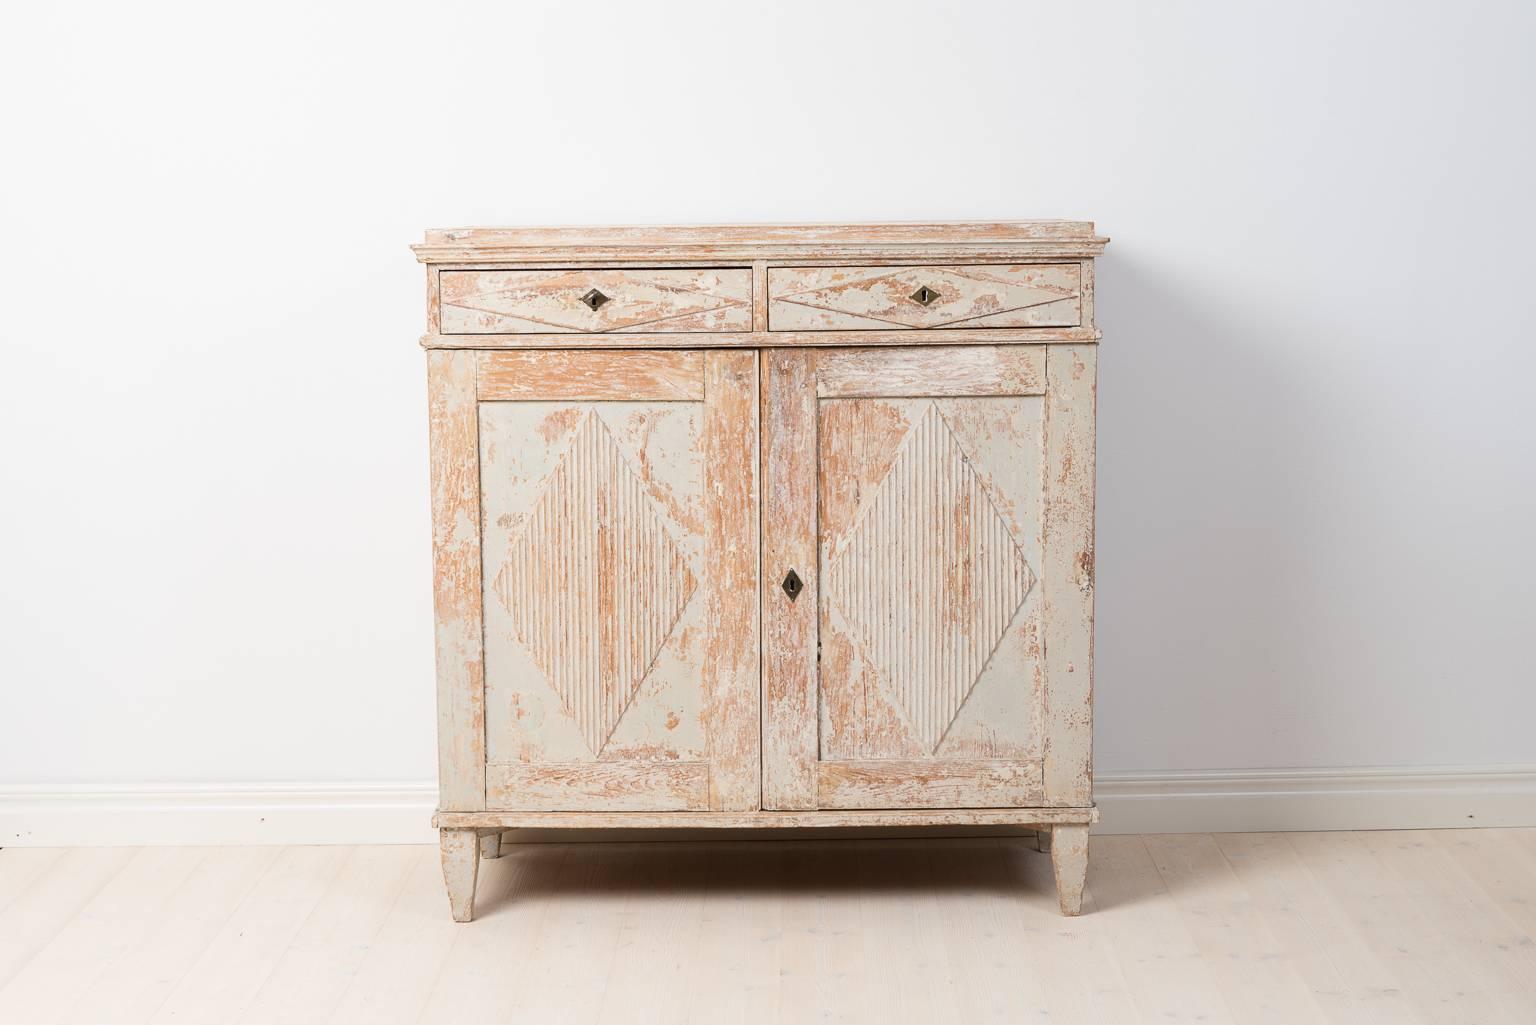 Period Gustavian sideboard with ribbed decor on doors and drawers. Paint, locks and hardware are all original to the sideboard - from the 1780s. Unusually tall legs.